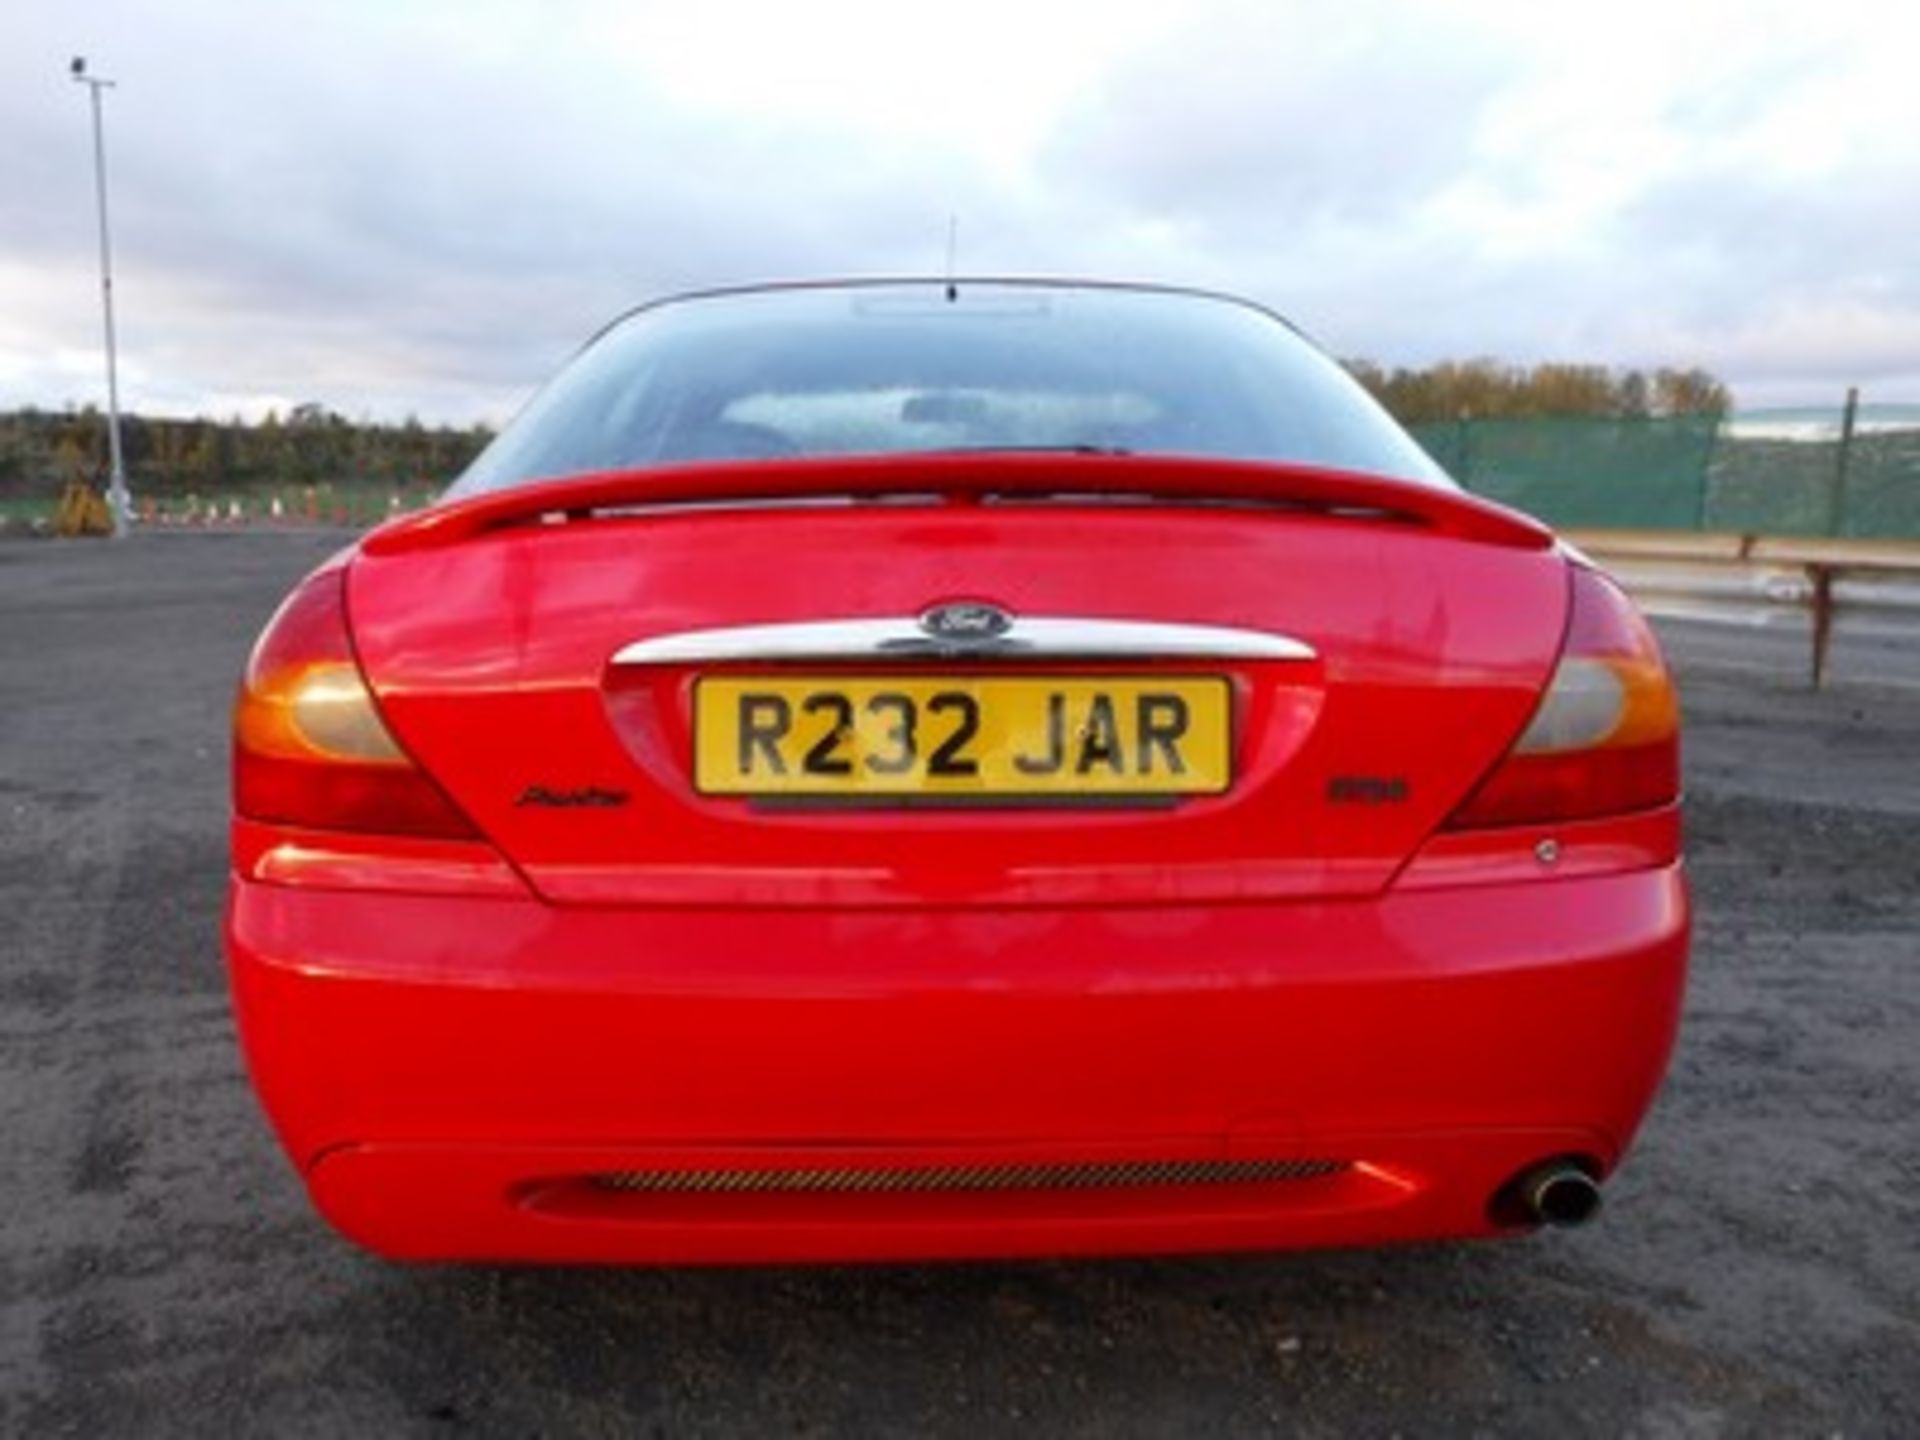 FORD MONDEO ST 24 V6 - 2497cc - Image 9 of 12